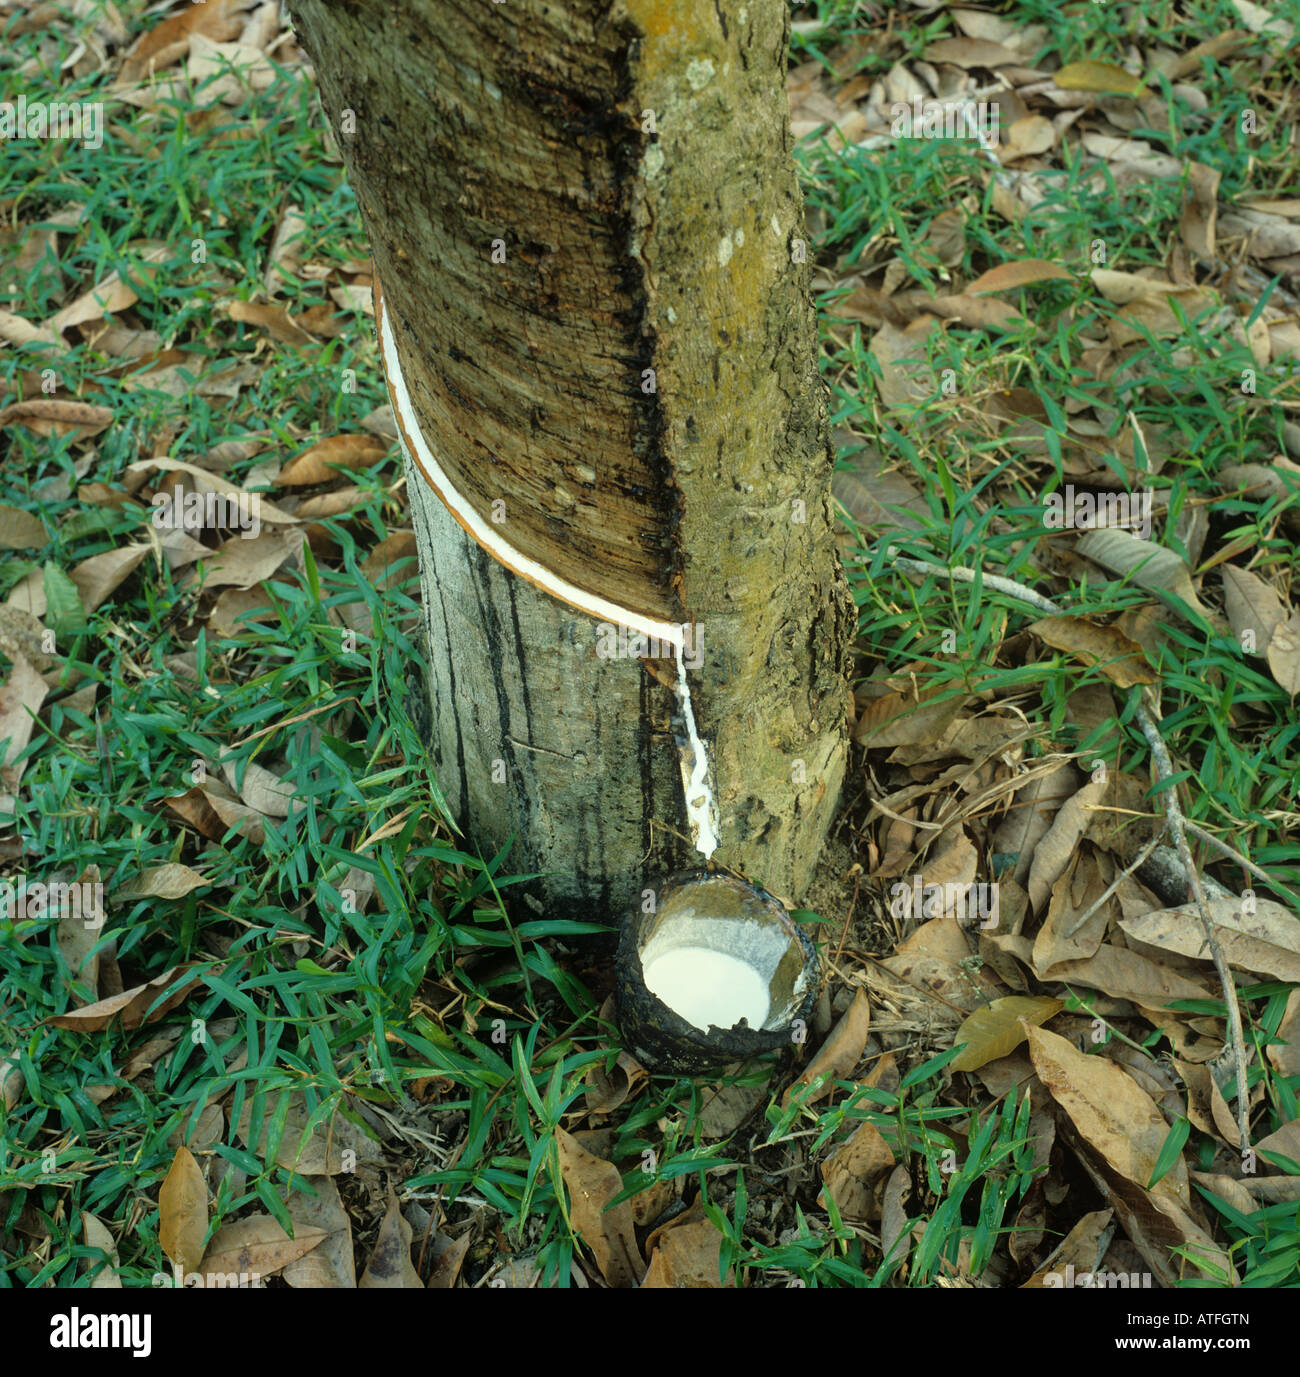 Latex flowing from the newly made cut in a runner tree bark Malaysia Stock Photo